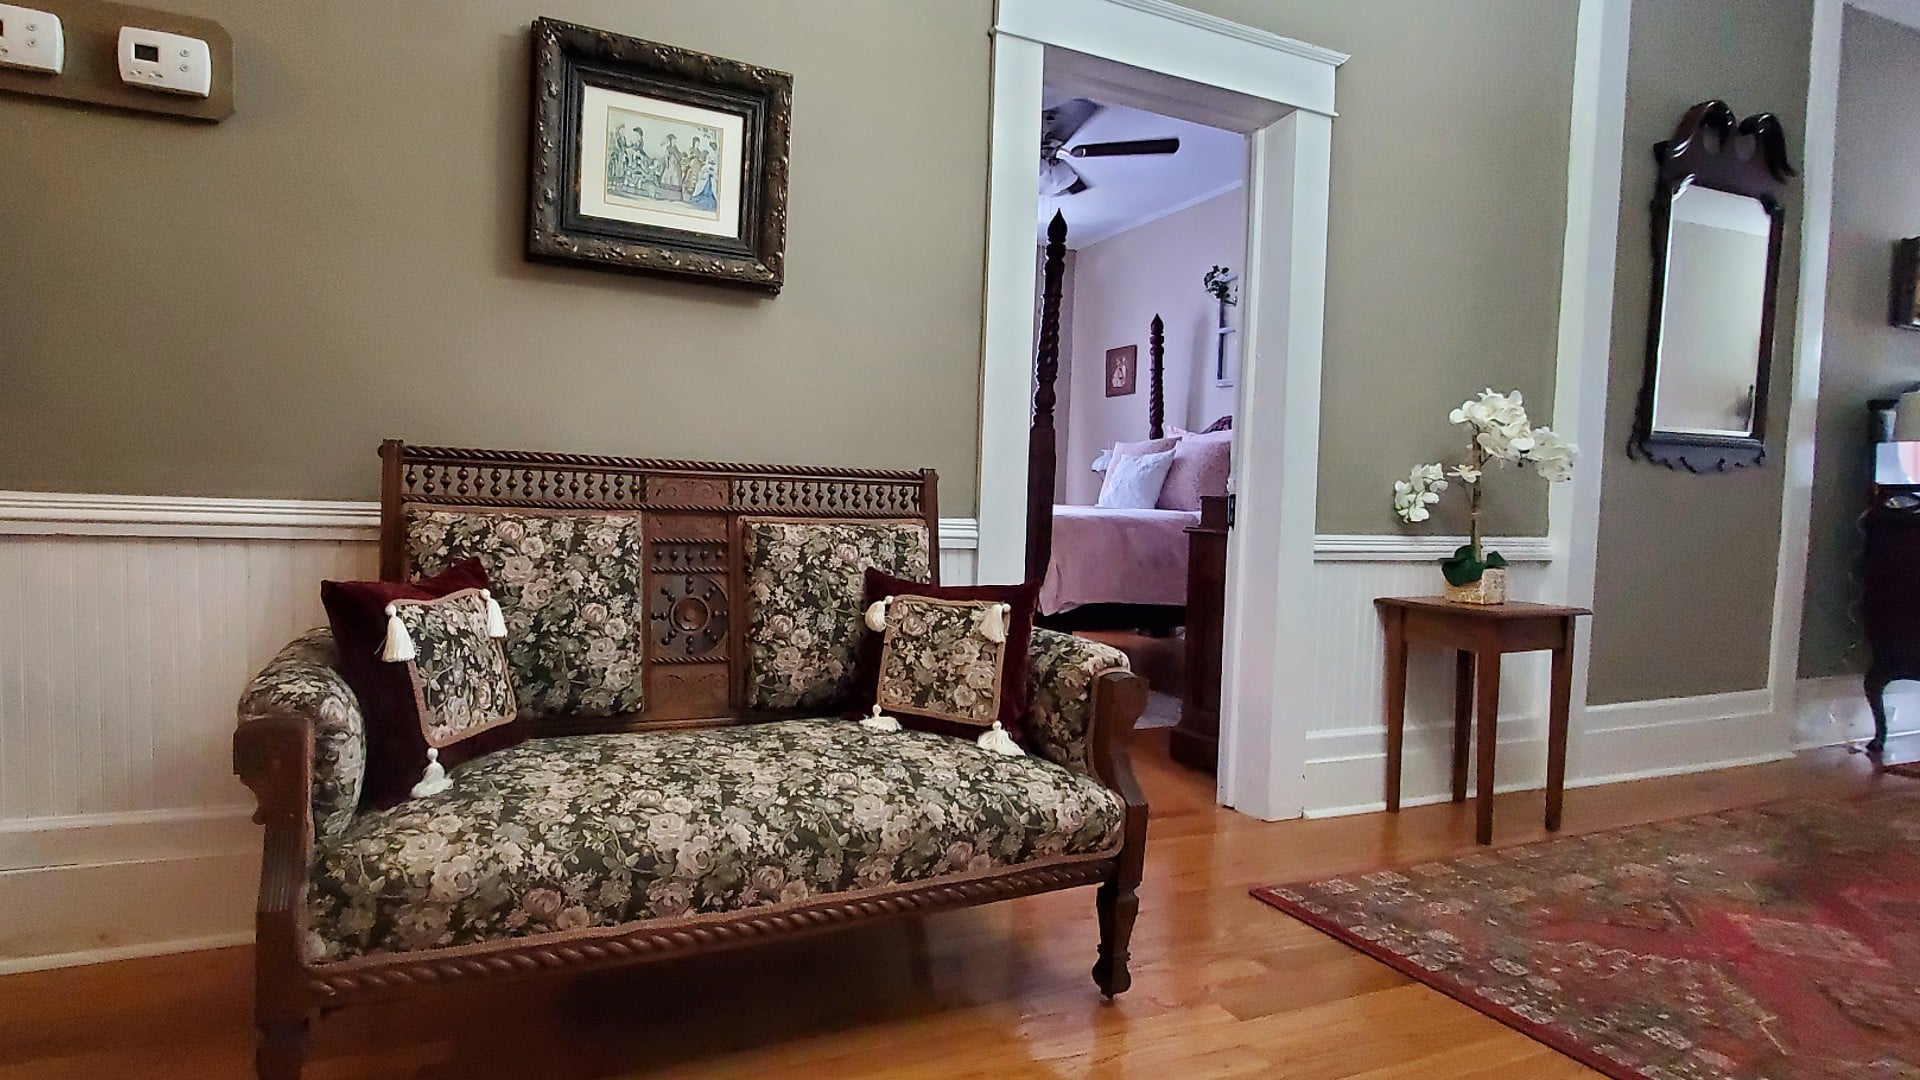 Hallway of a home with an antique loveseat in a floral pattern next to a doorway to a bedroom